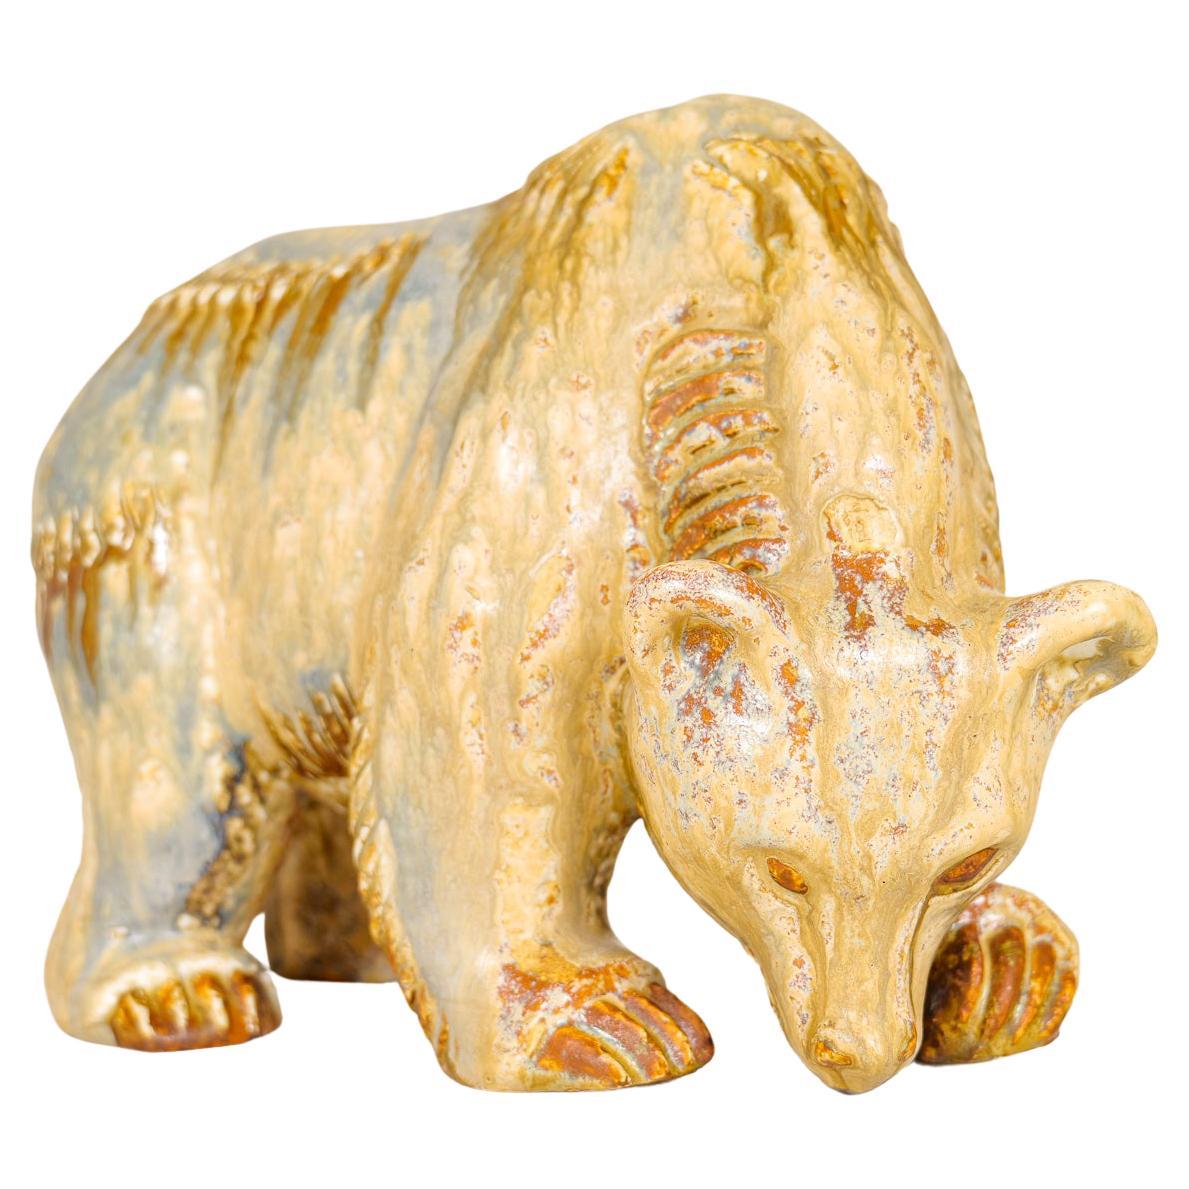 This large and heavy ceramic bear was made in Sweden during the 1950s at Rörstrand and designed by famous Gunnar Nylund. Together with the fanatics pattern and the stunning glaze this version 31/300 is a great edition to any home. 

Dimensions: